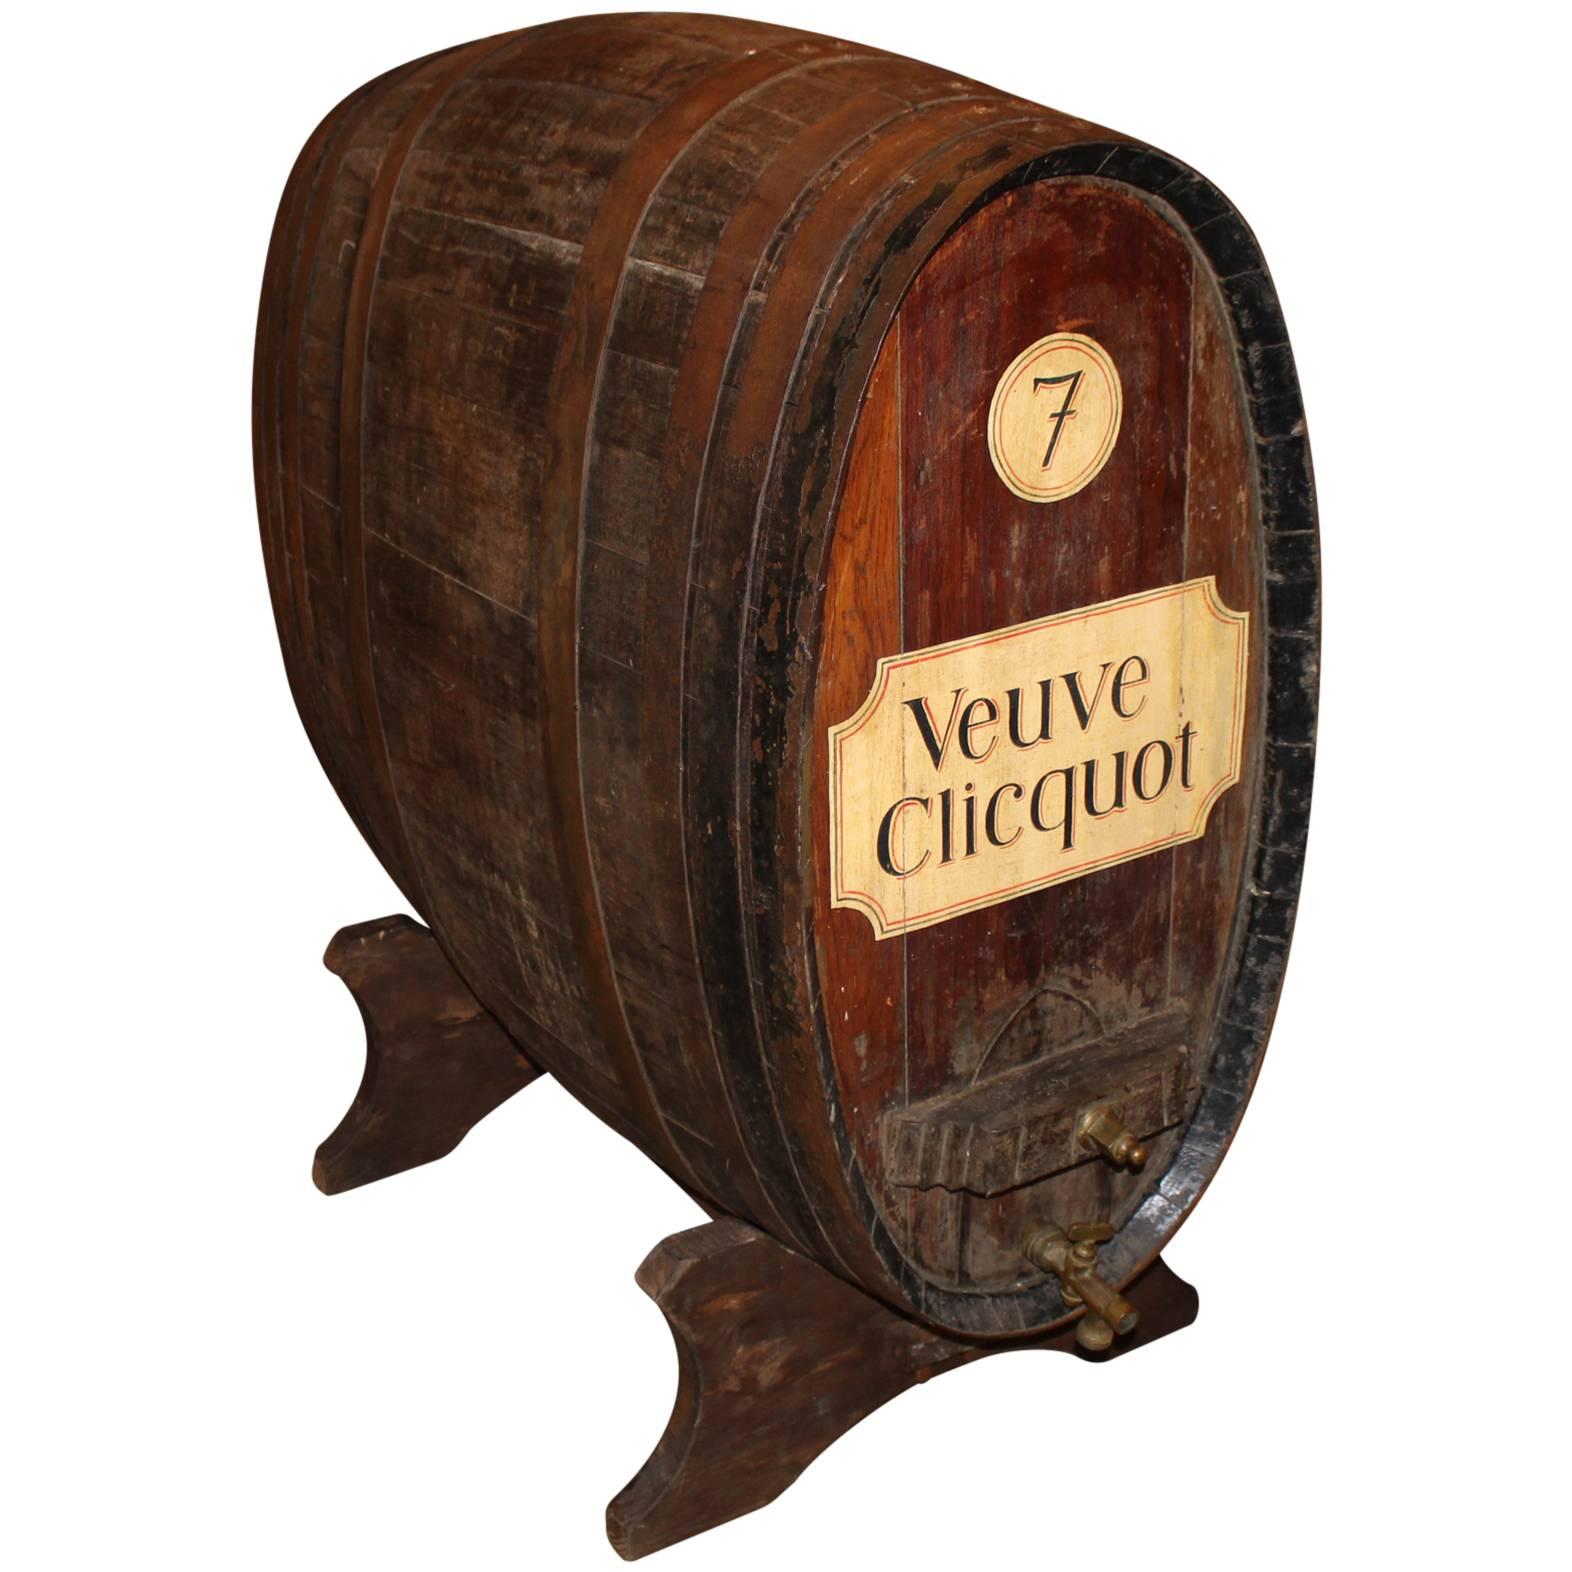 Large French Oak Wine or Champagne Barrel / Cask on Stand